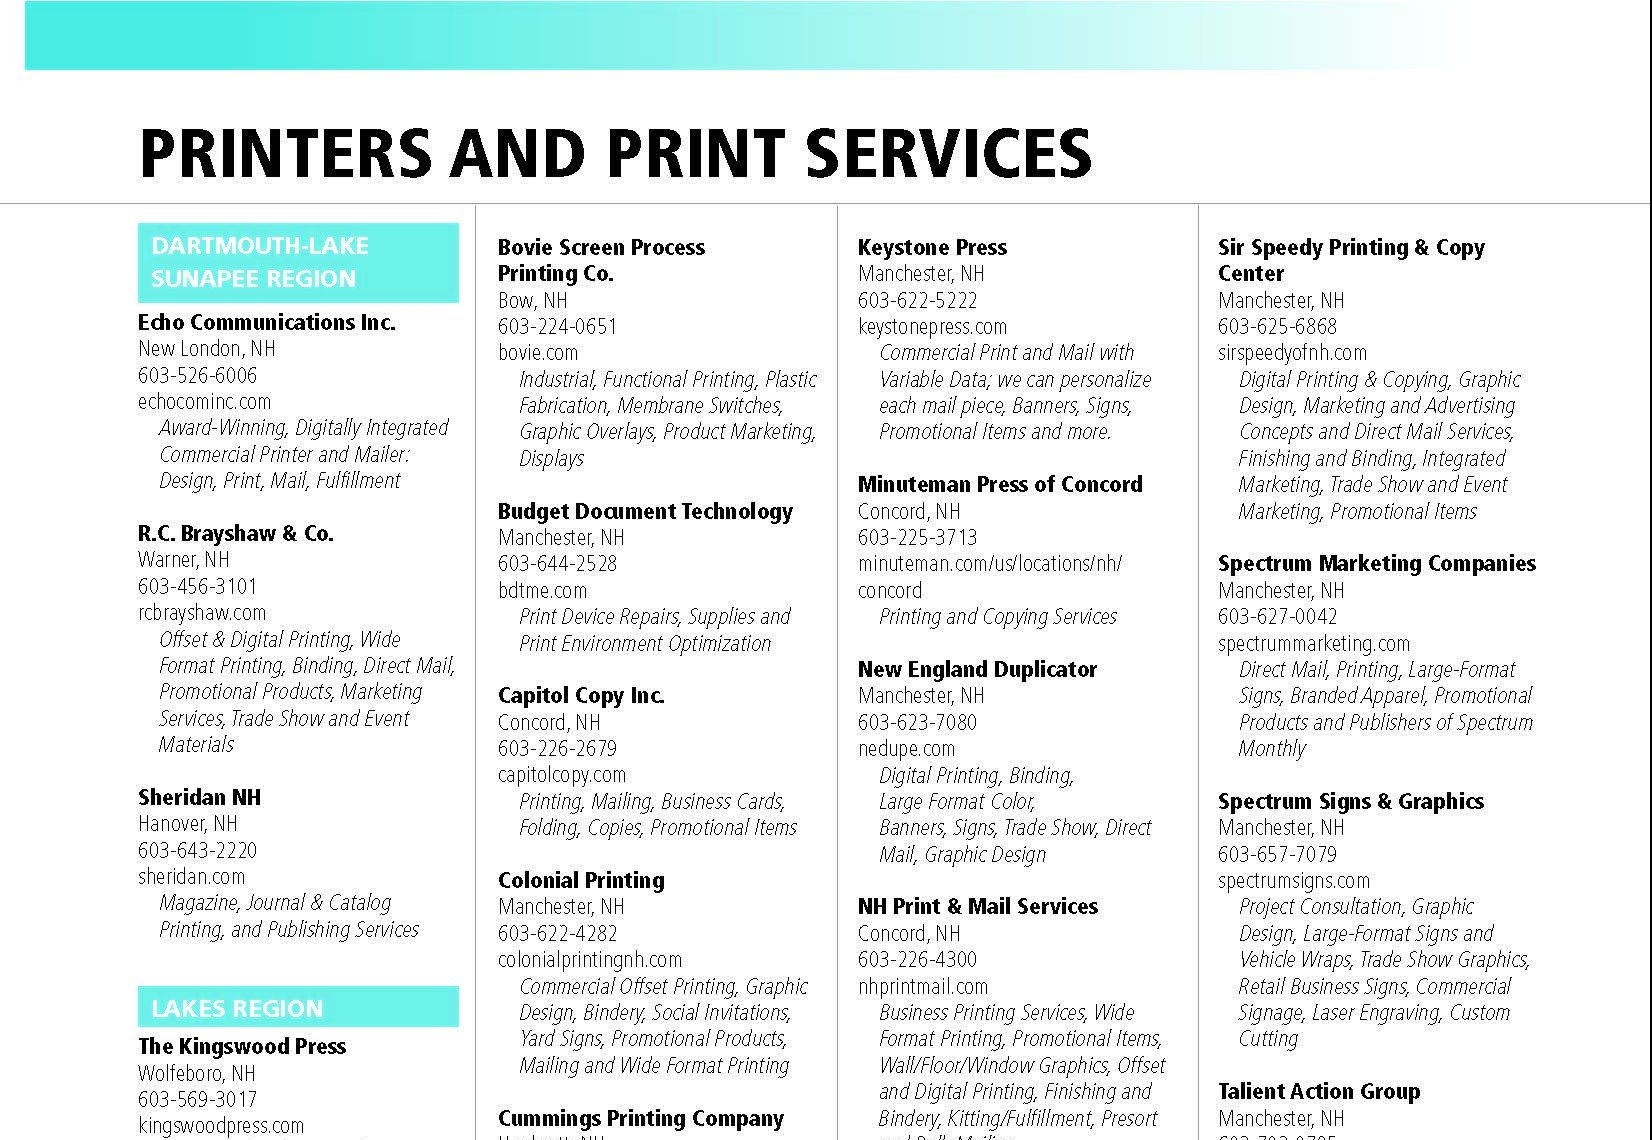 List of Printers and Print Services - NH Review